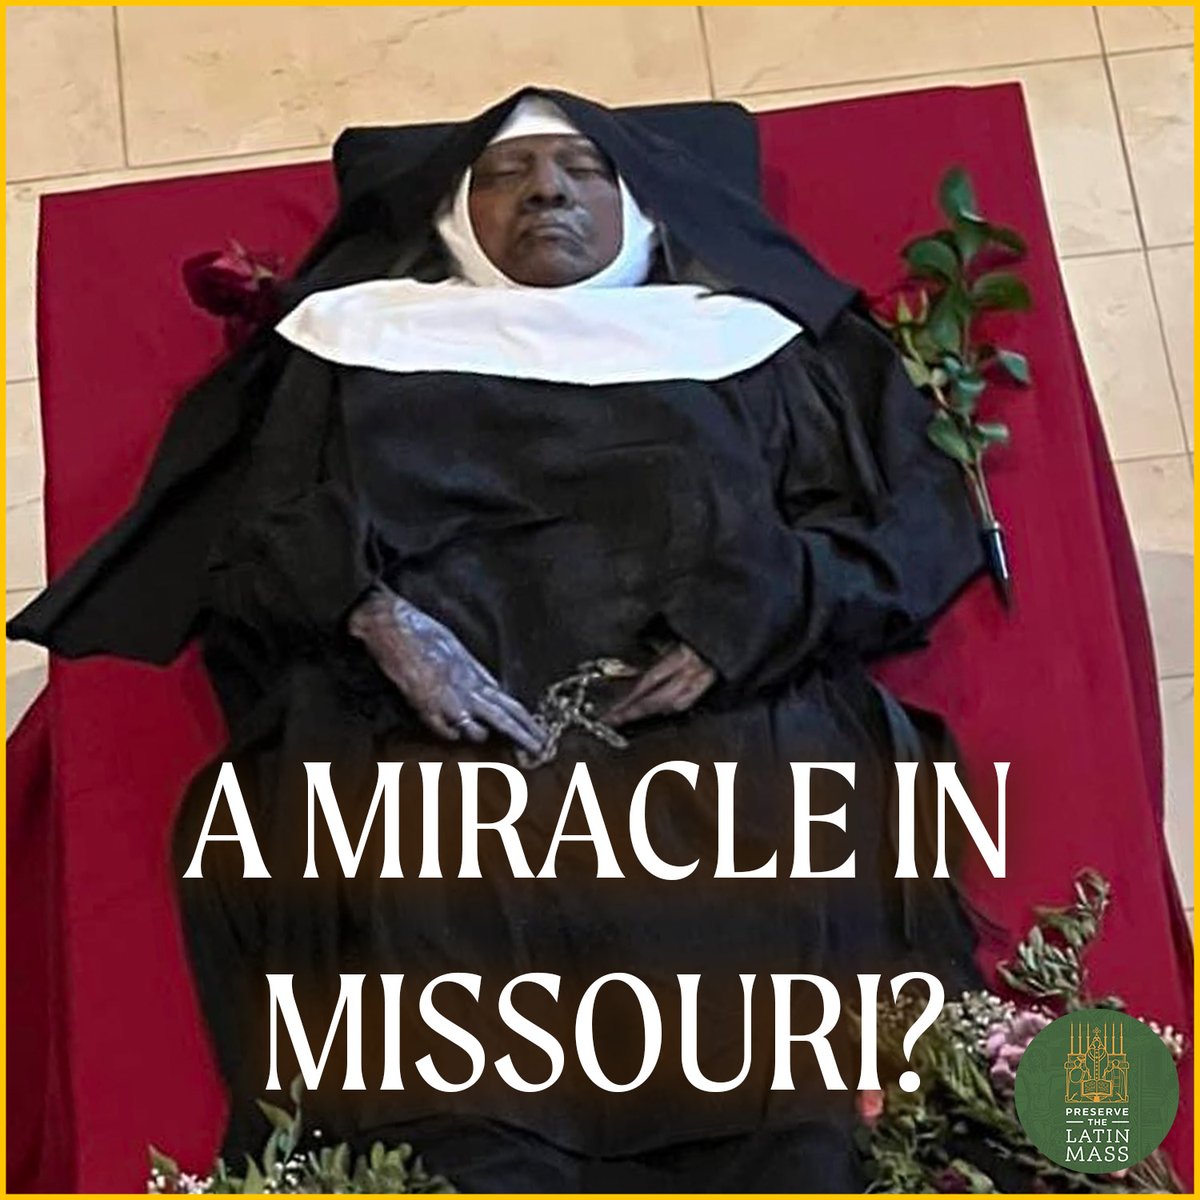 A miracle in Missouri? Body of Benedictine Sisters’ foundress is thought to be incorrupt

ow.ly/pxZ050OulXU